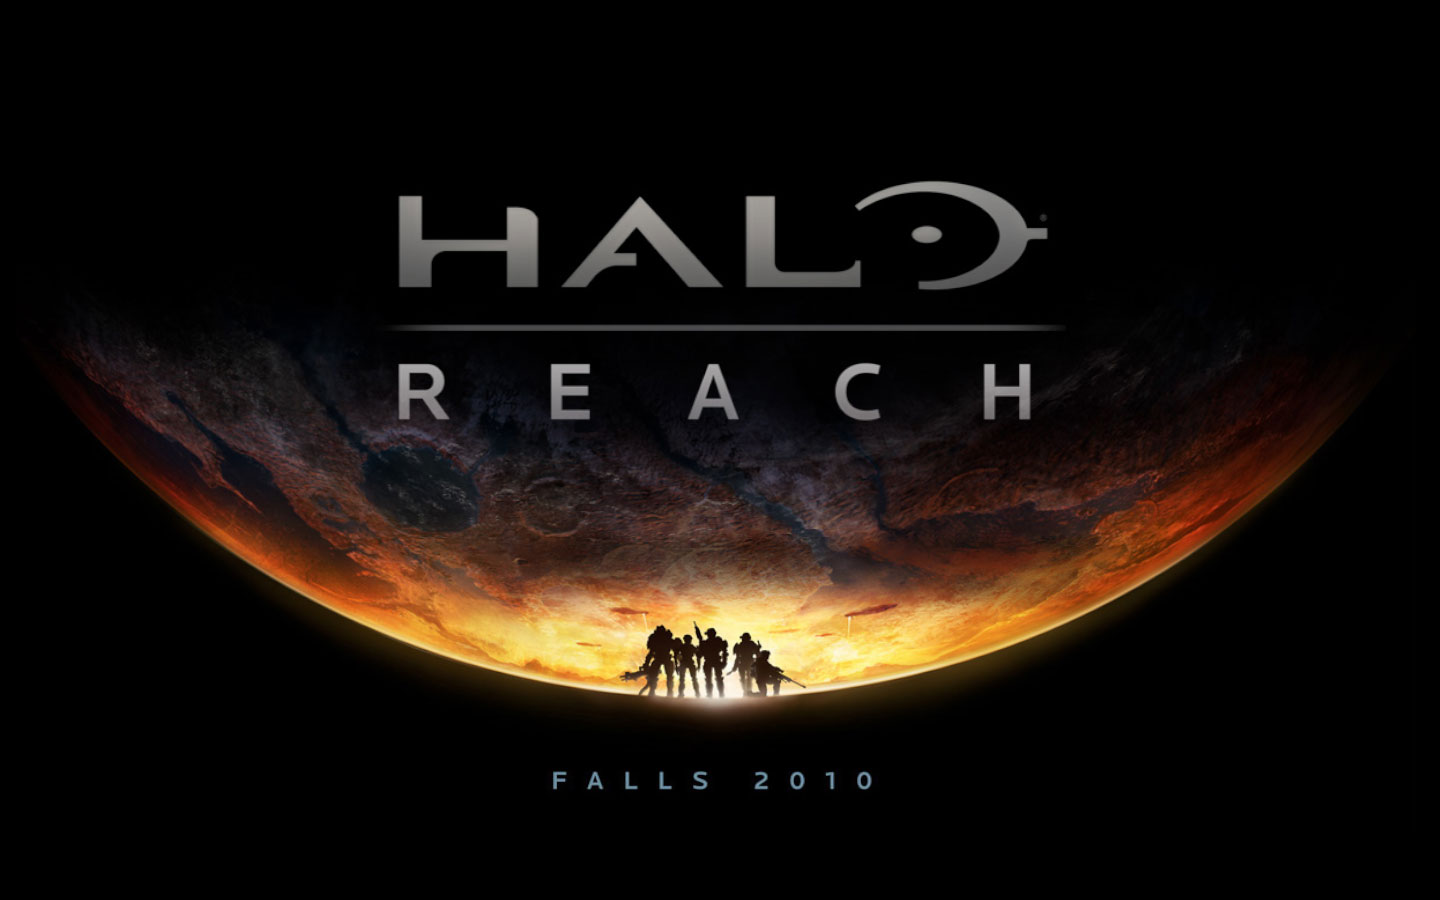  sequel Halo Reach was released two days ago 14th September 2010